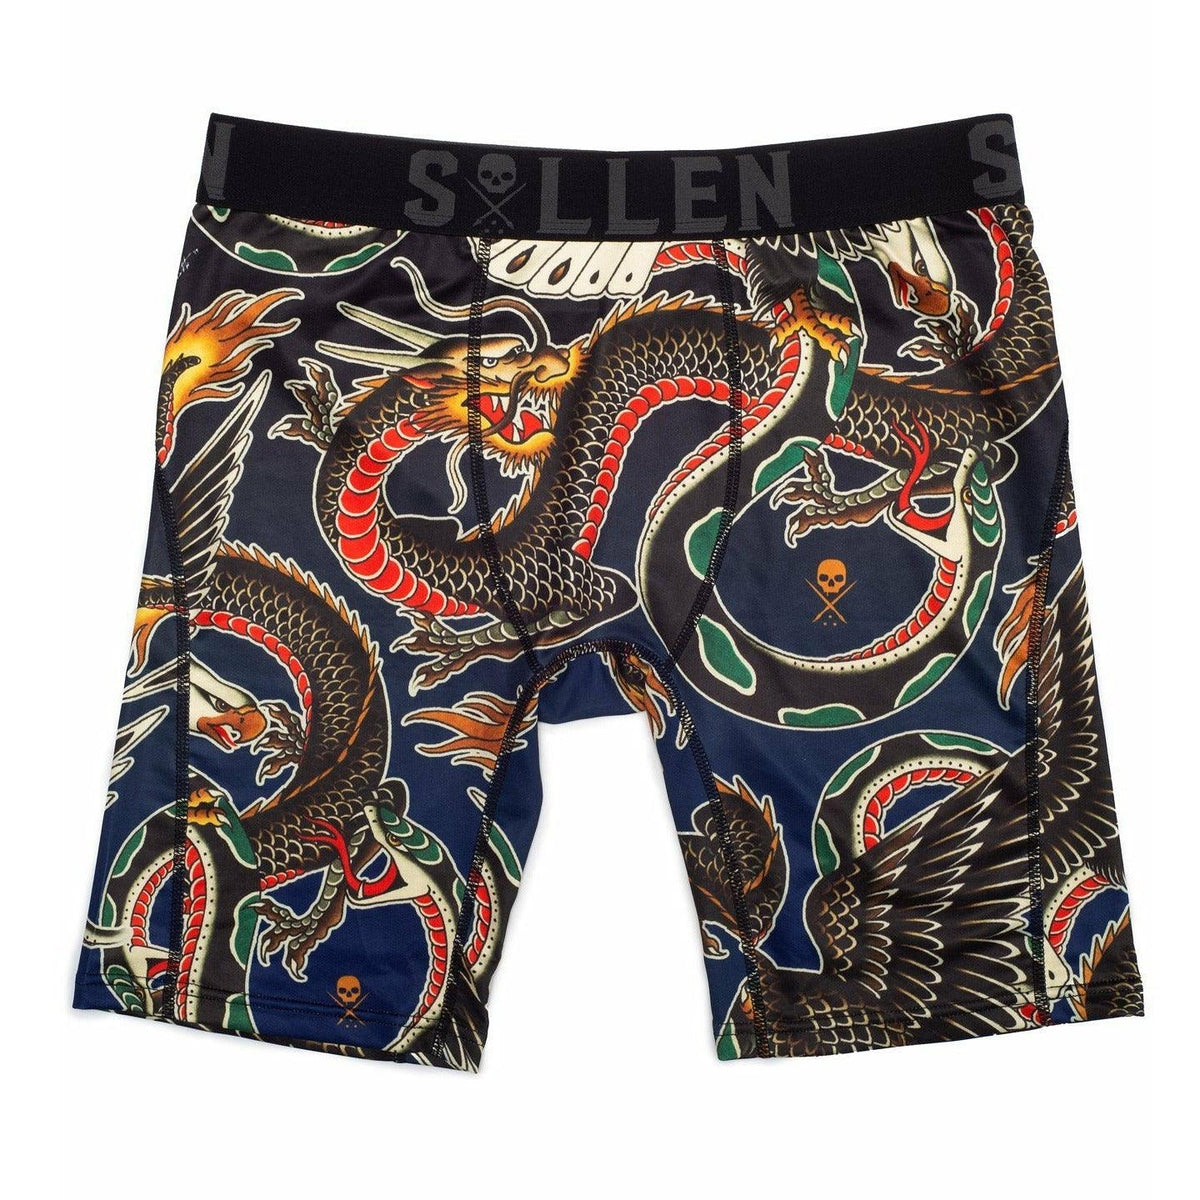 SULLEN-ART-COLLECTIVE-CLOTHING-BATTALGLIA-REALE-BOXERS - UNDERWEAR - Synik Clothing - synikclothing.com